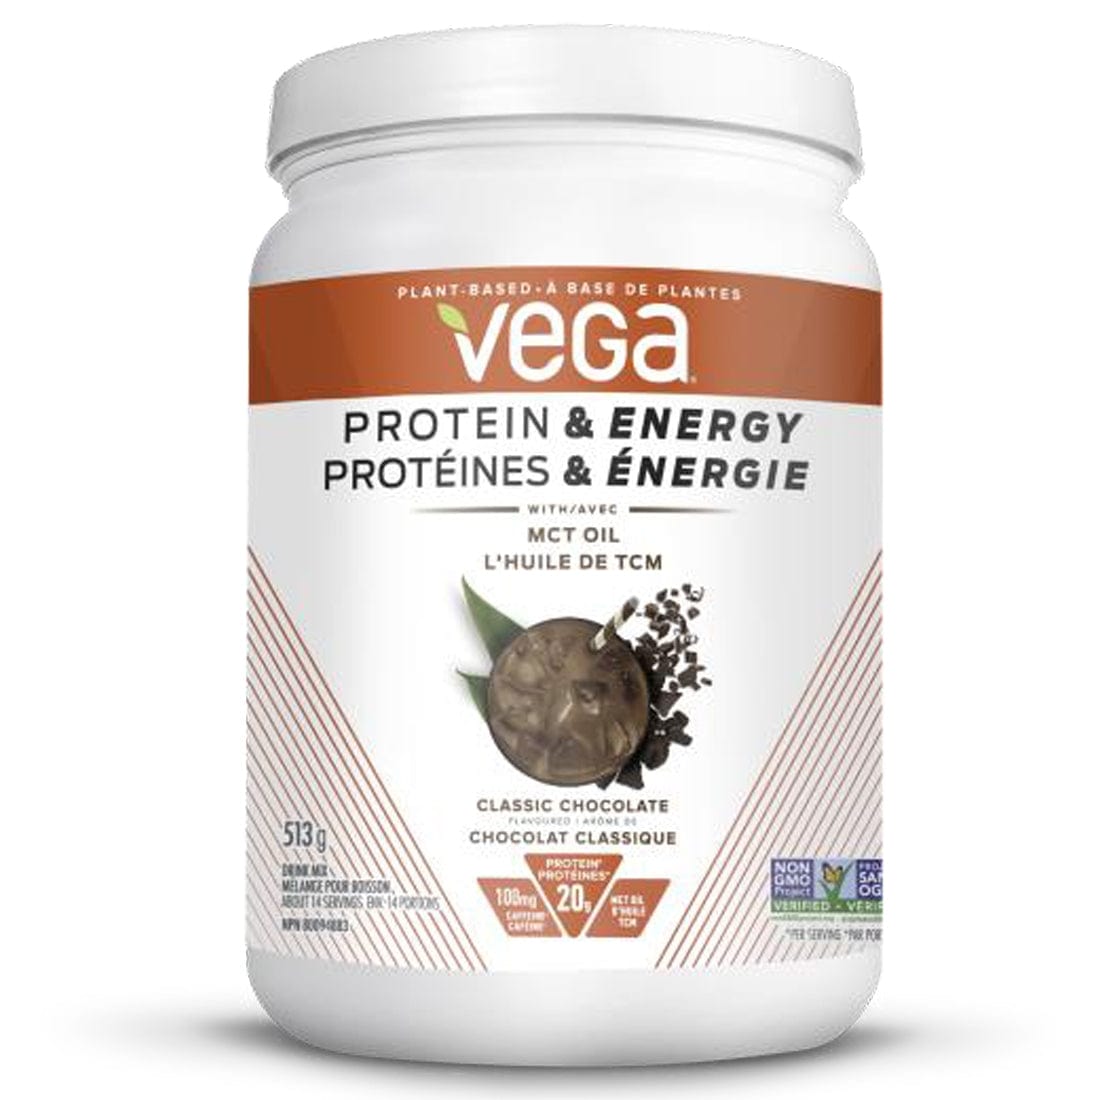 Vega Protein and Energy (With MCT Oil), 513g